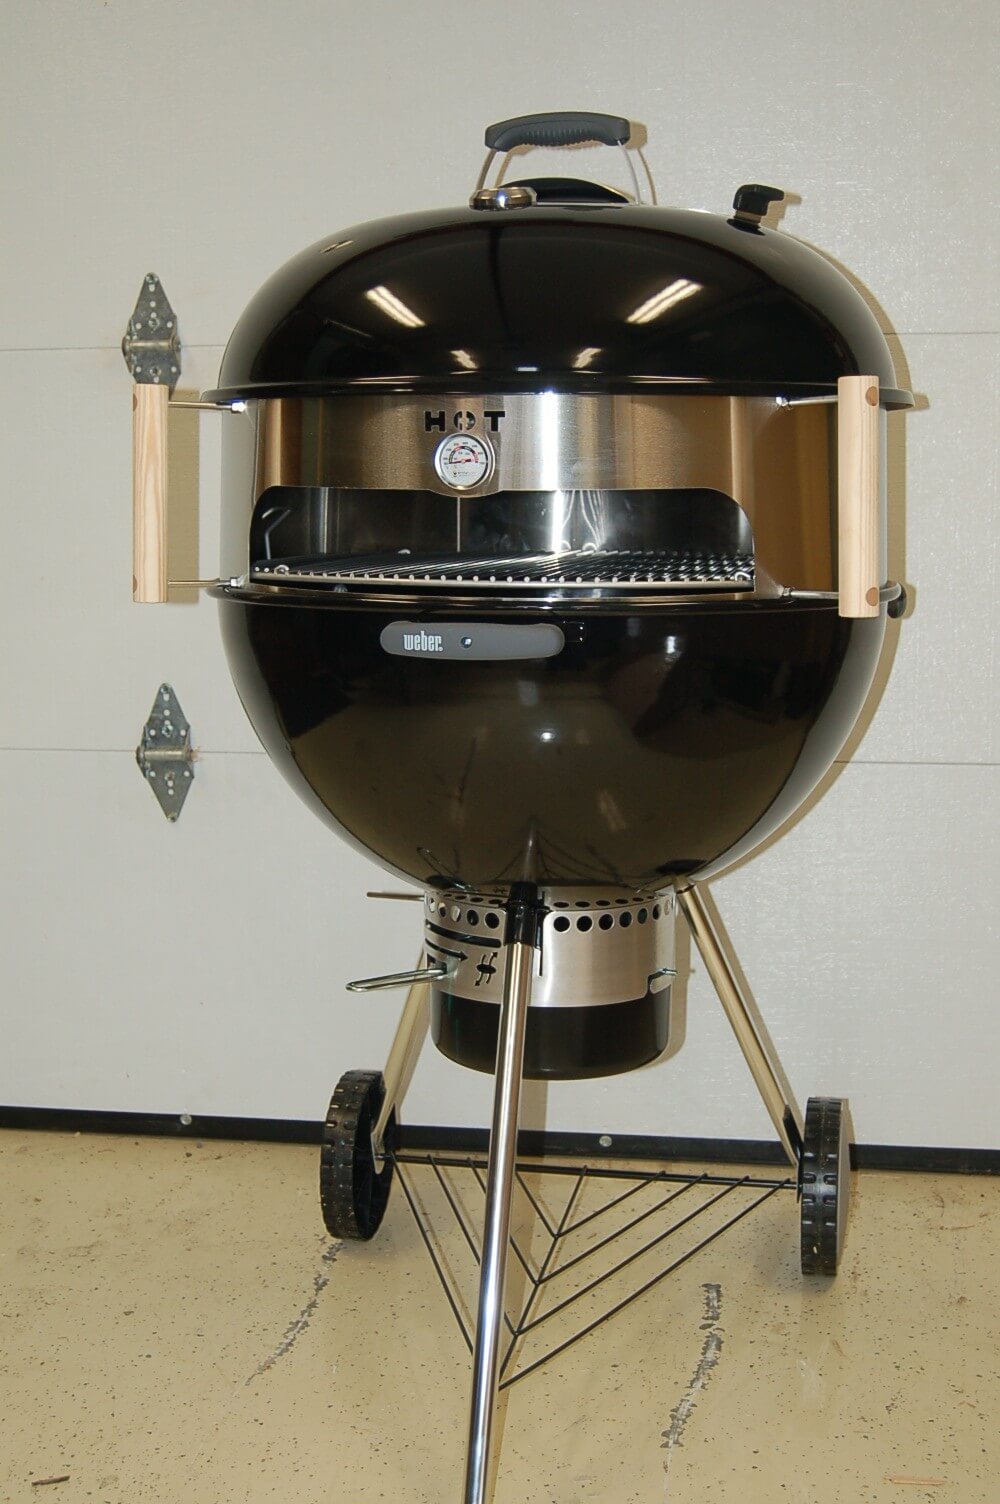 KettlePizza Installed on a Weber 26.75 Kettle Grill